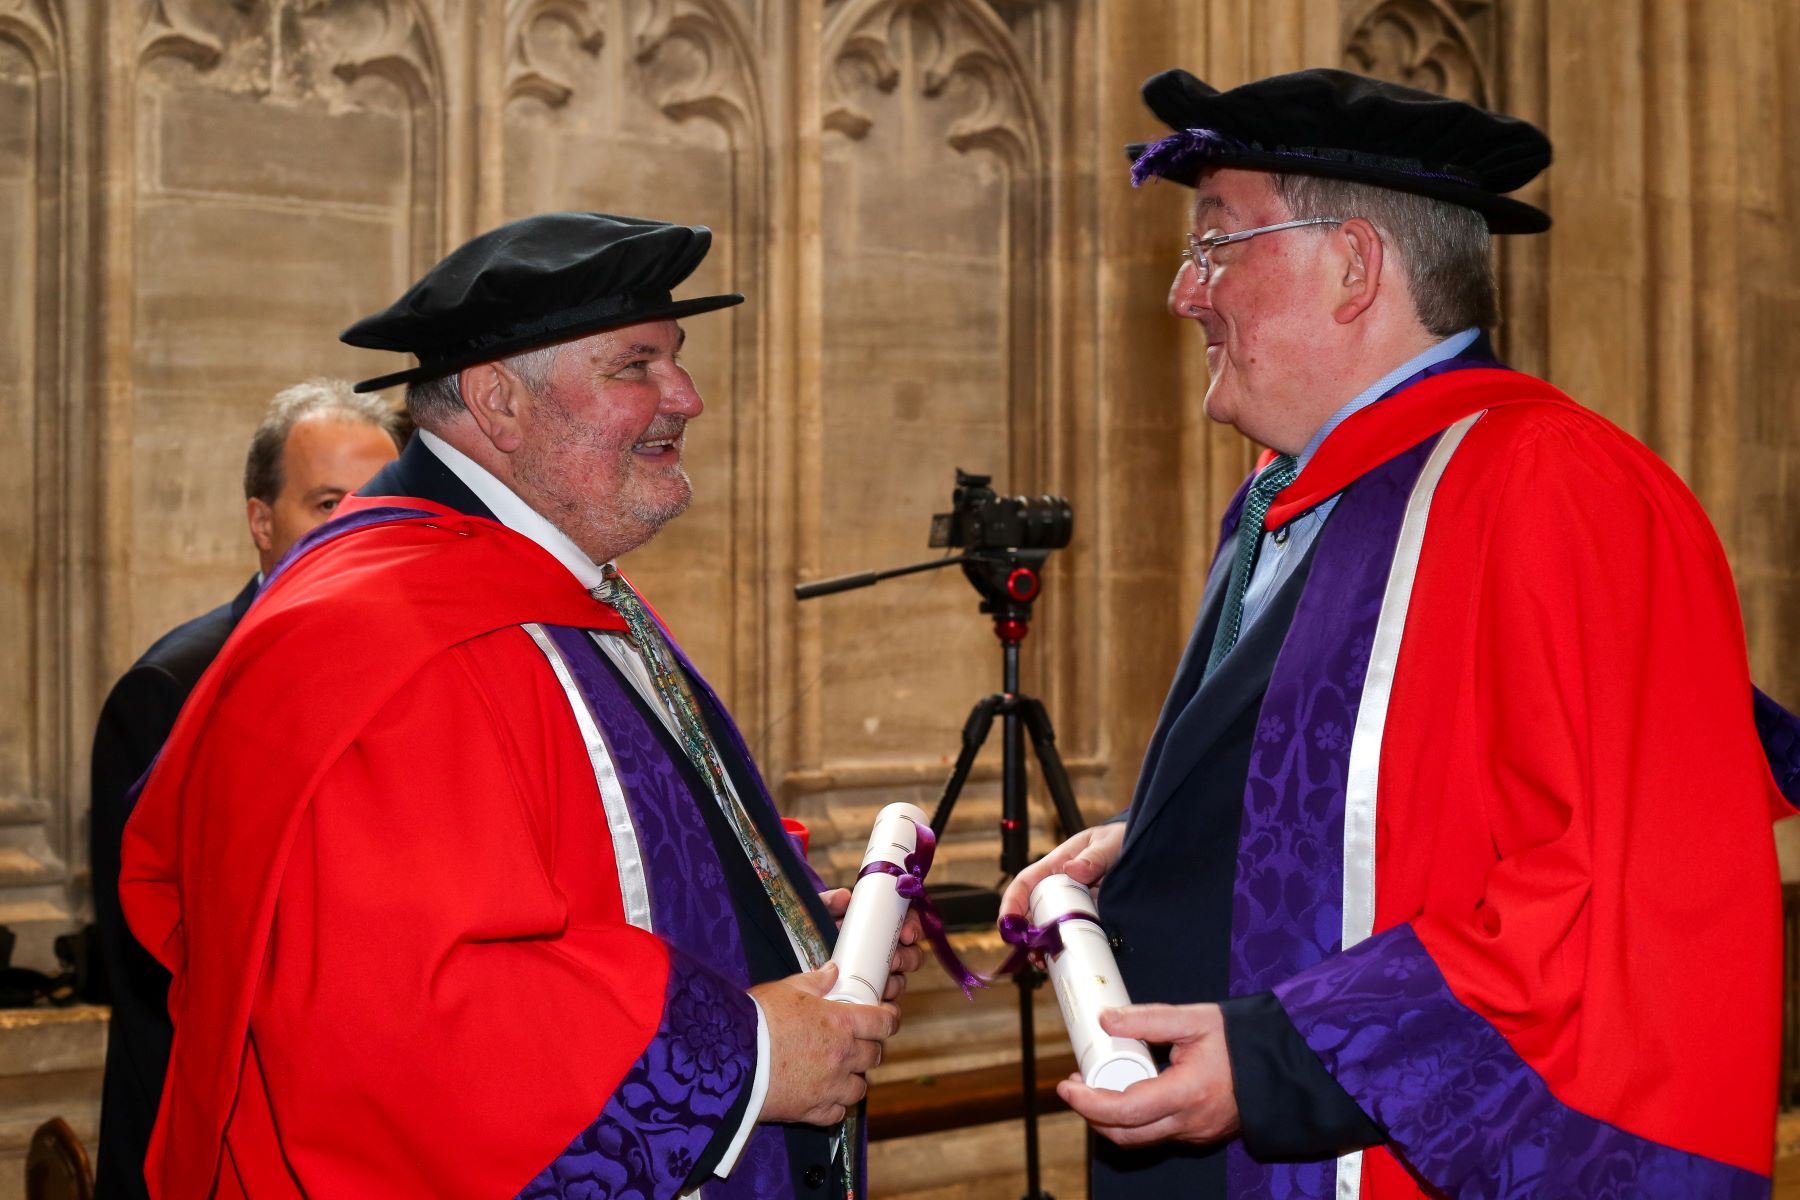 Two men facing each other in graduation robes